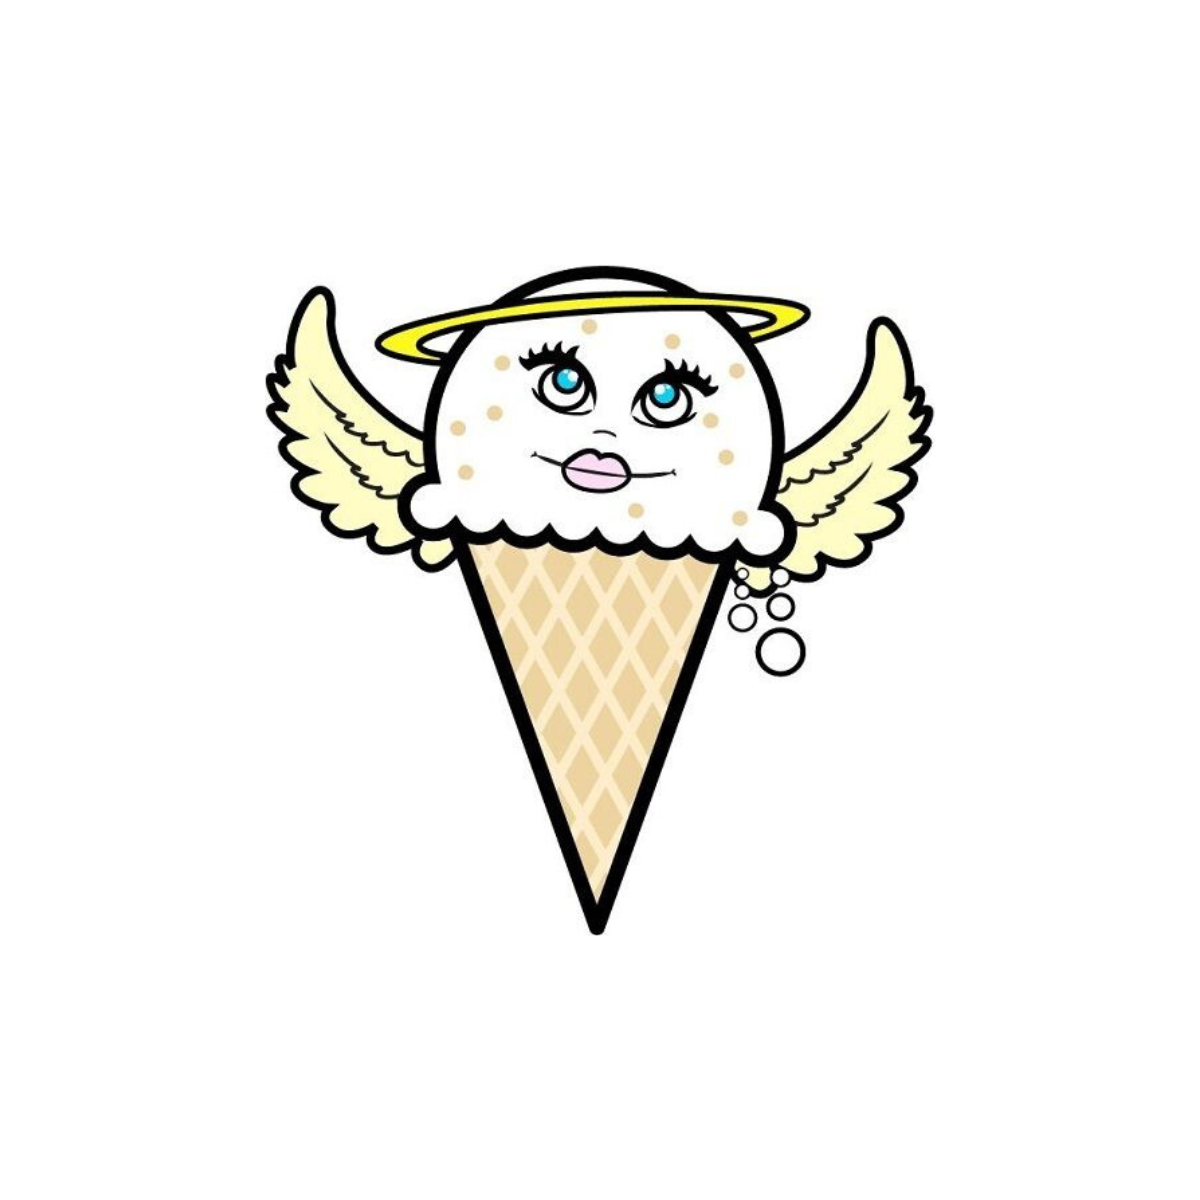 a digital illustration of an ice cream cone with a smiling face, angel wings and a halo